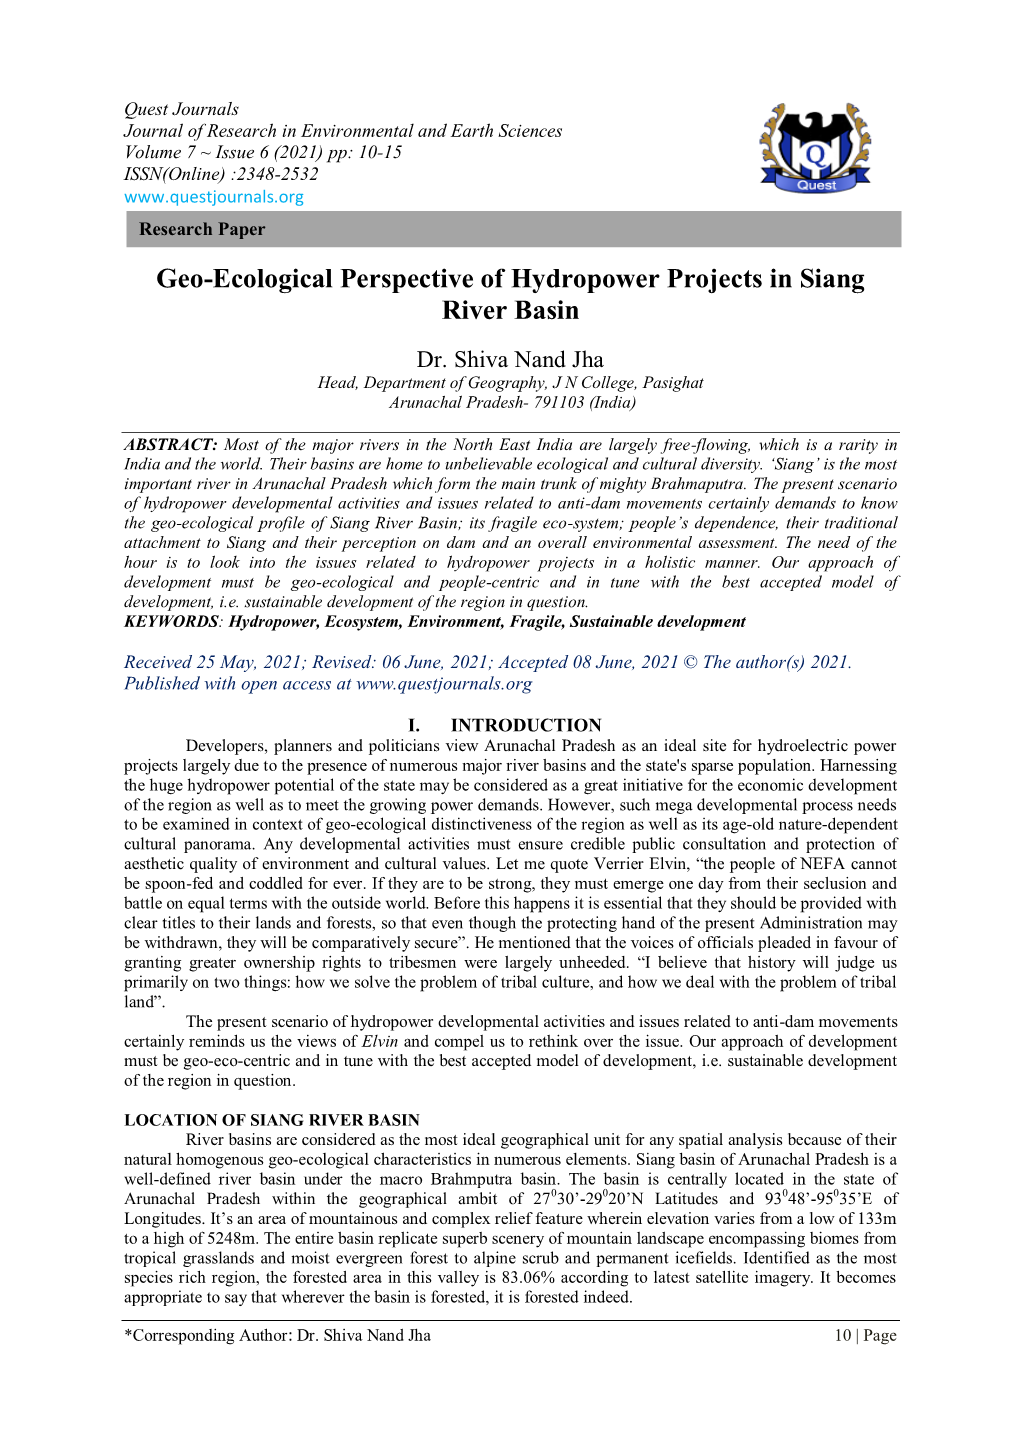 Geo-Ecological Perspective of Hydropower Projects in Siang River Basin